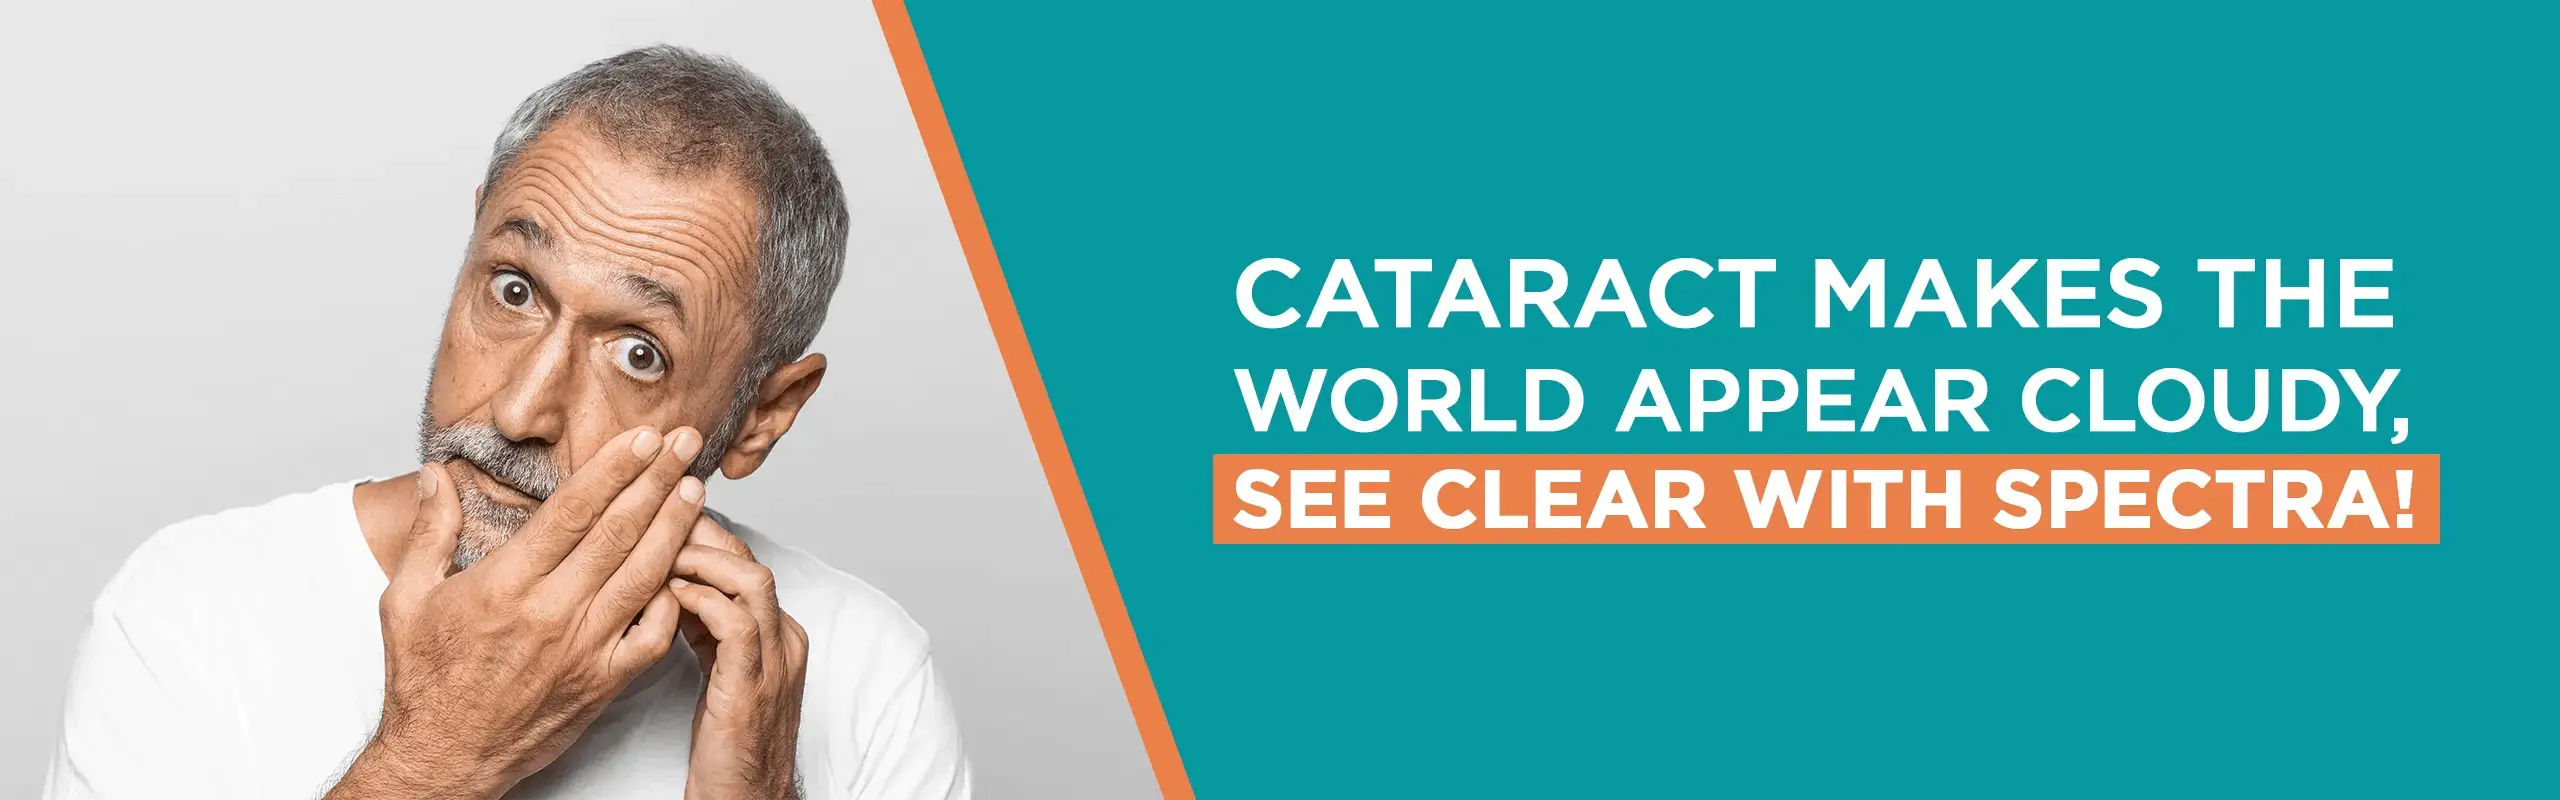 Cataract makes the world appear cloudy, see clear with Spectra!